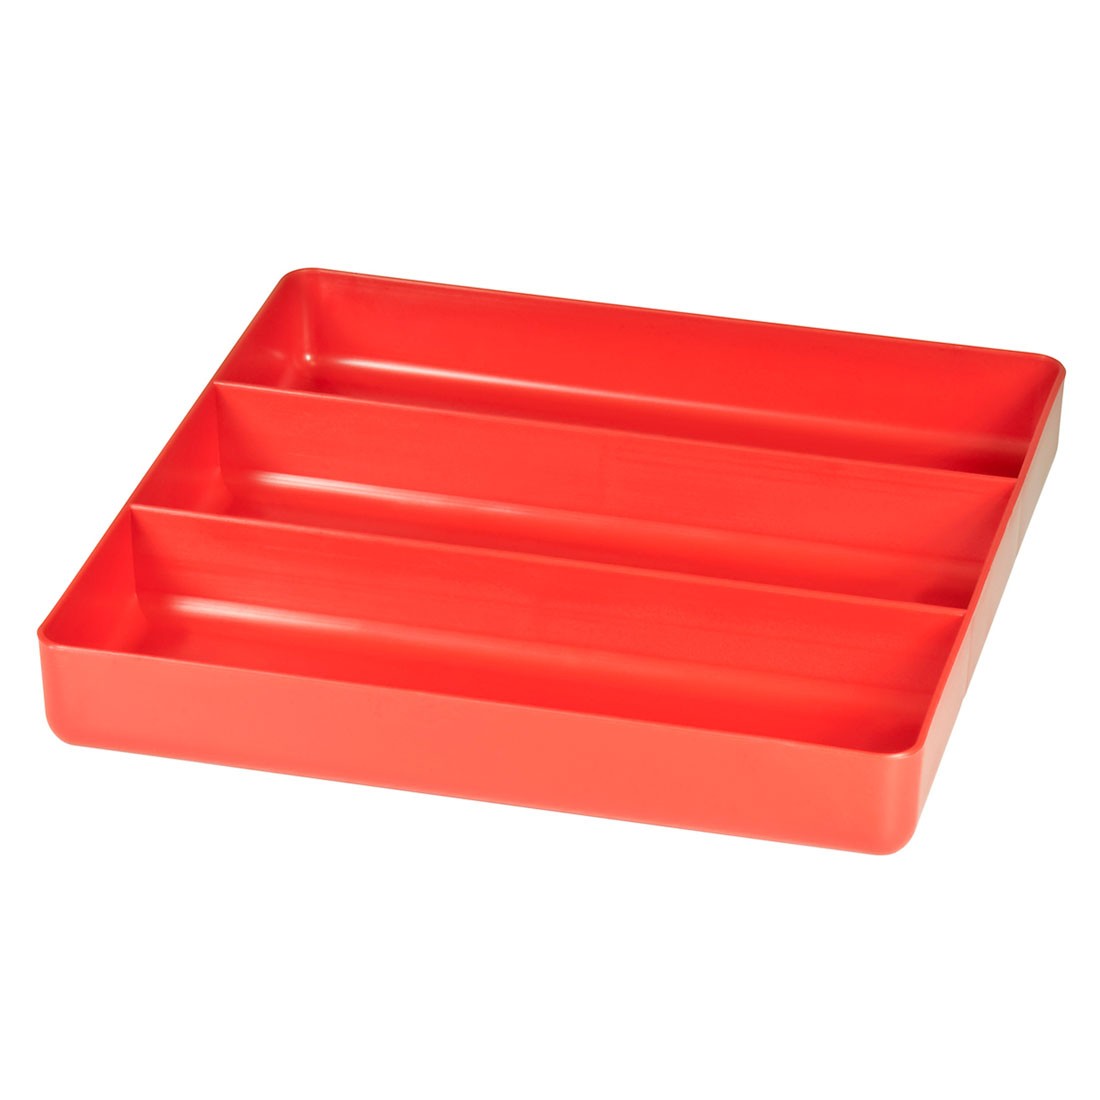 http://www.ernstmfg.com/shared/images/product/5020_three-compartment-organizer-tray_red-1100_1.jpg